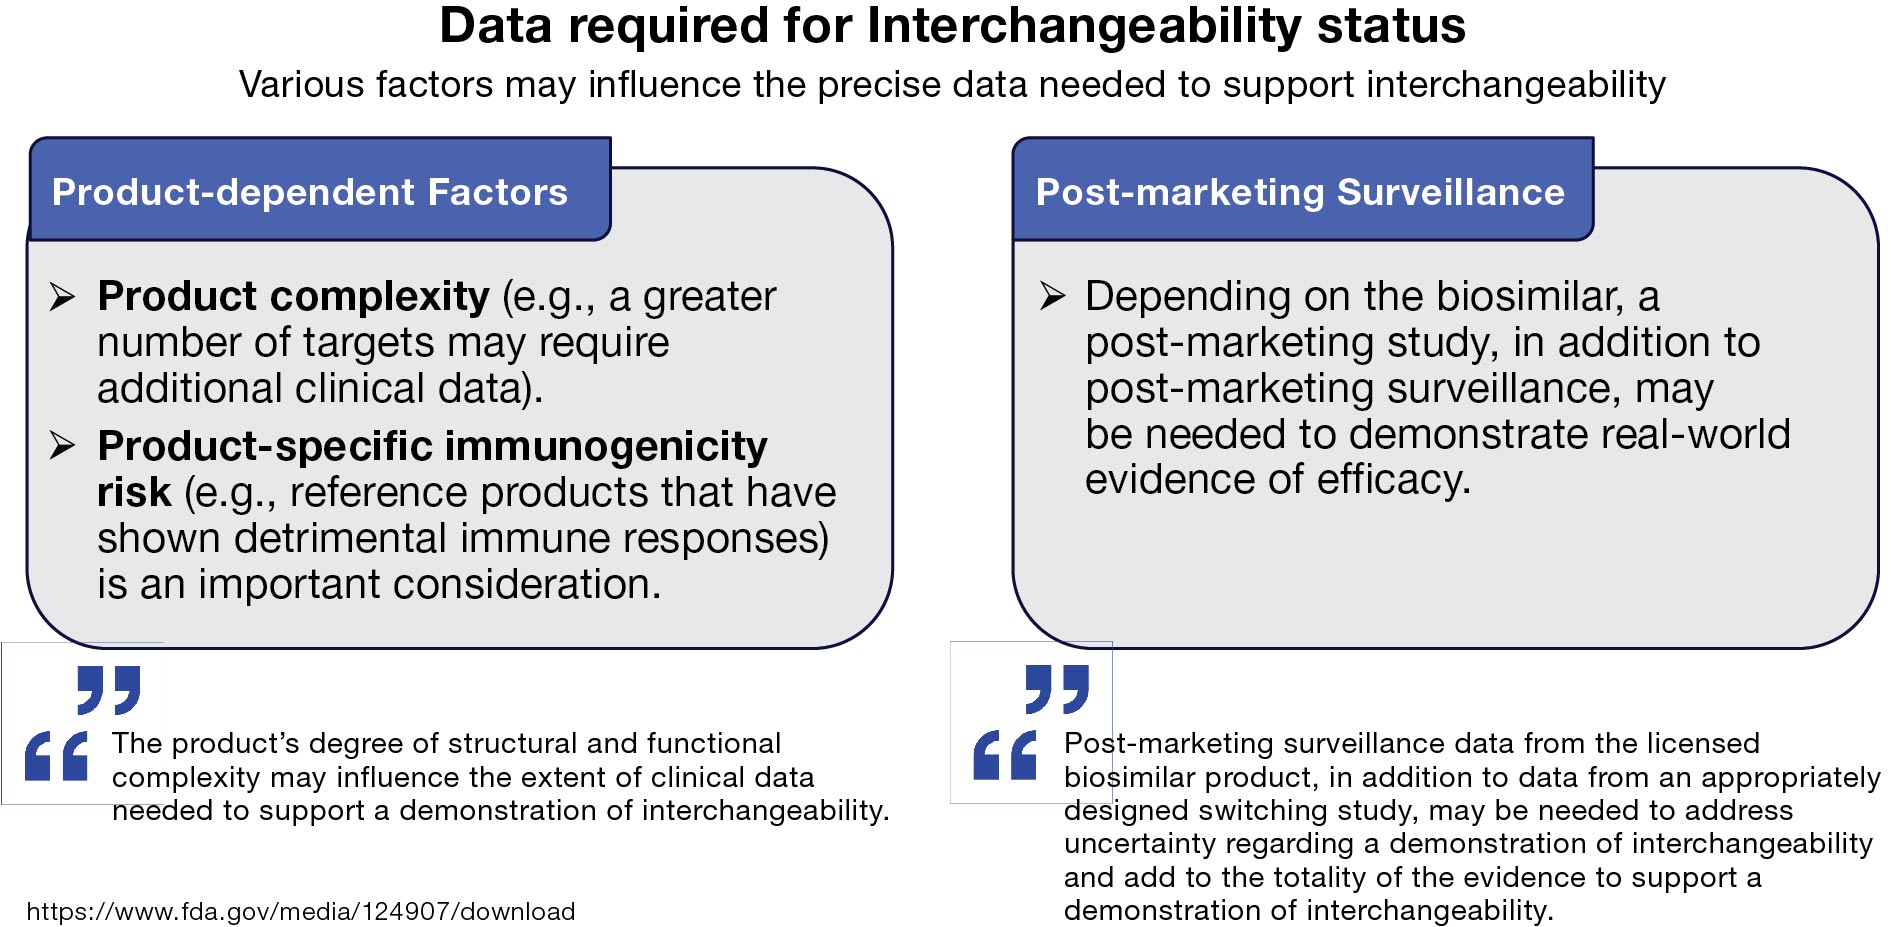 Data required for interchangeability status